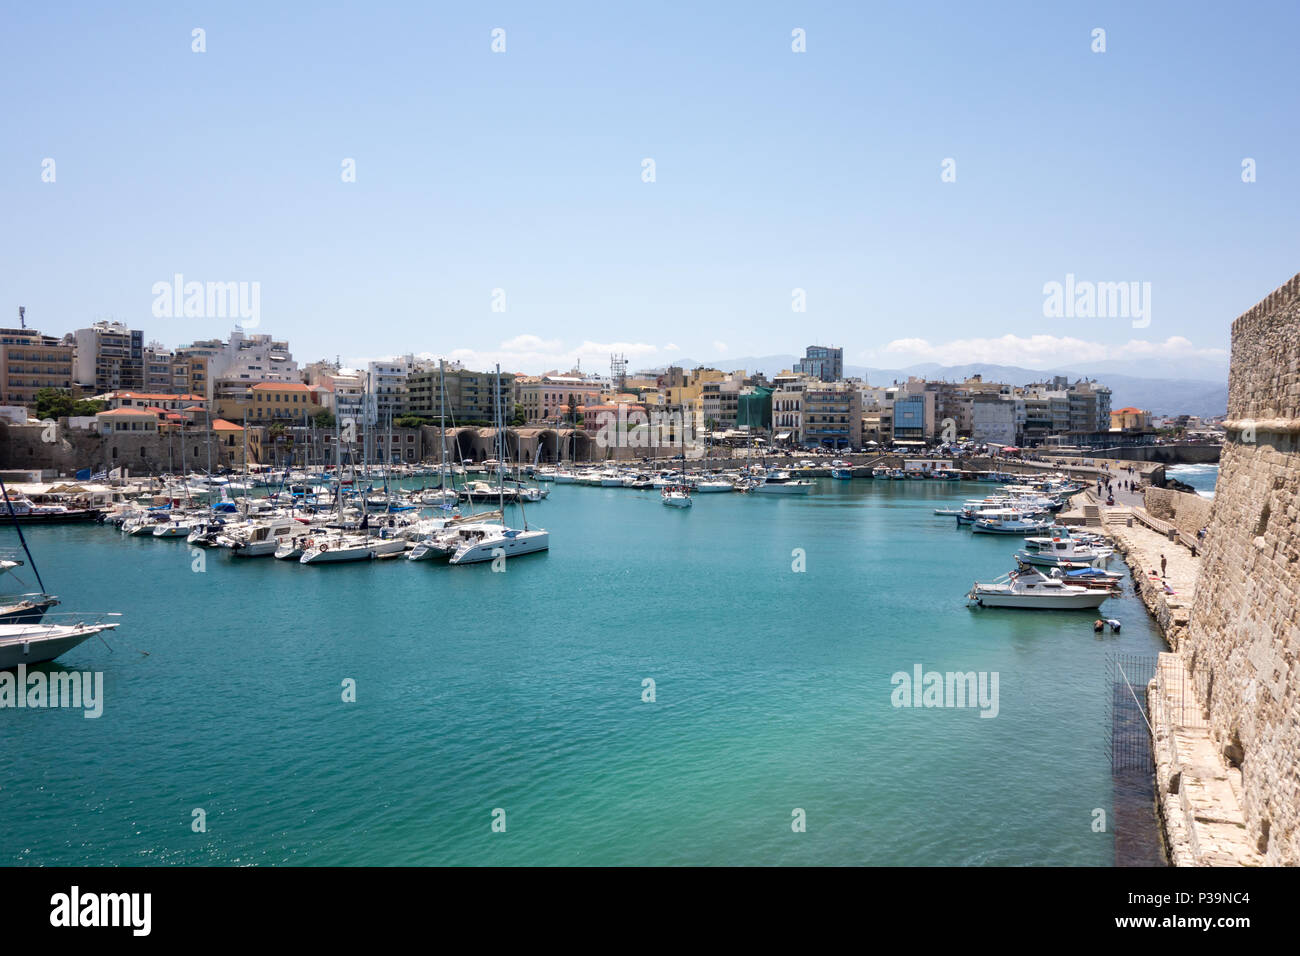 HERAKLION, CRETE - 13th May 2018: A view of the old Venetian harbour from the Koules Fortress. Stock Photo